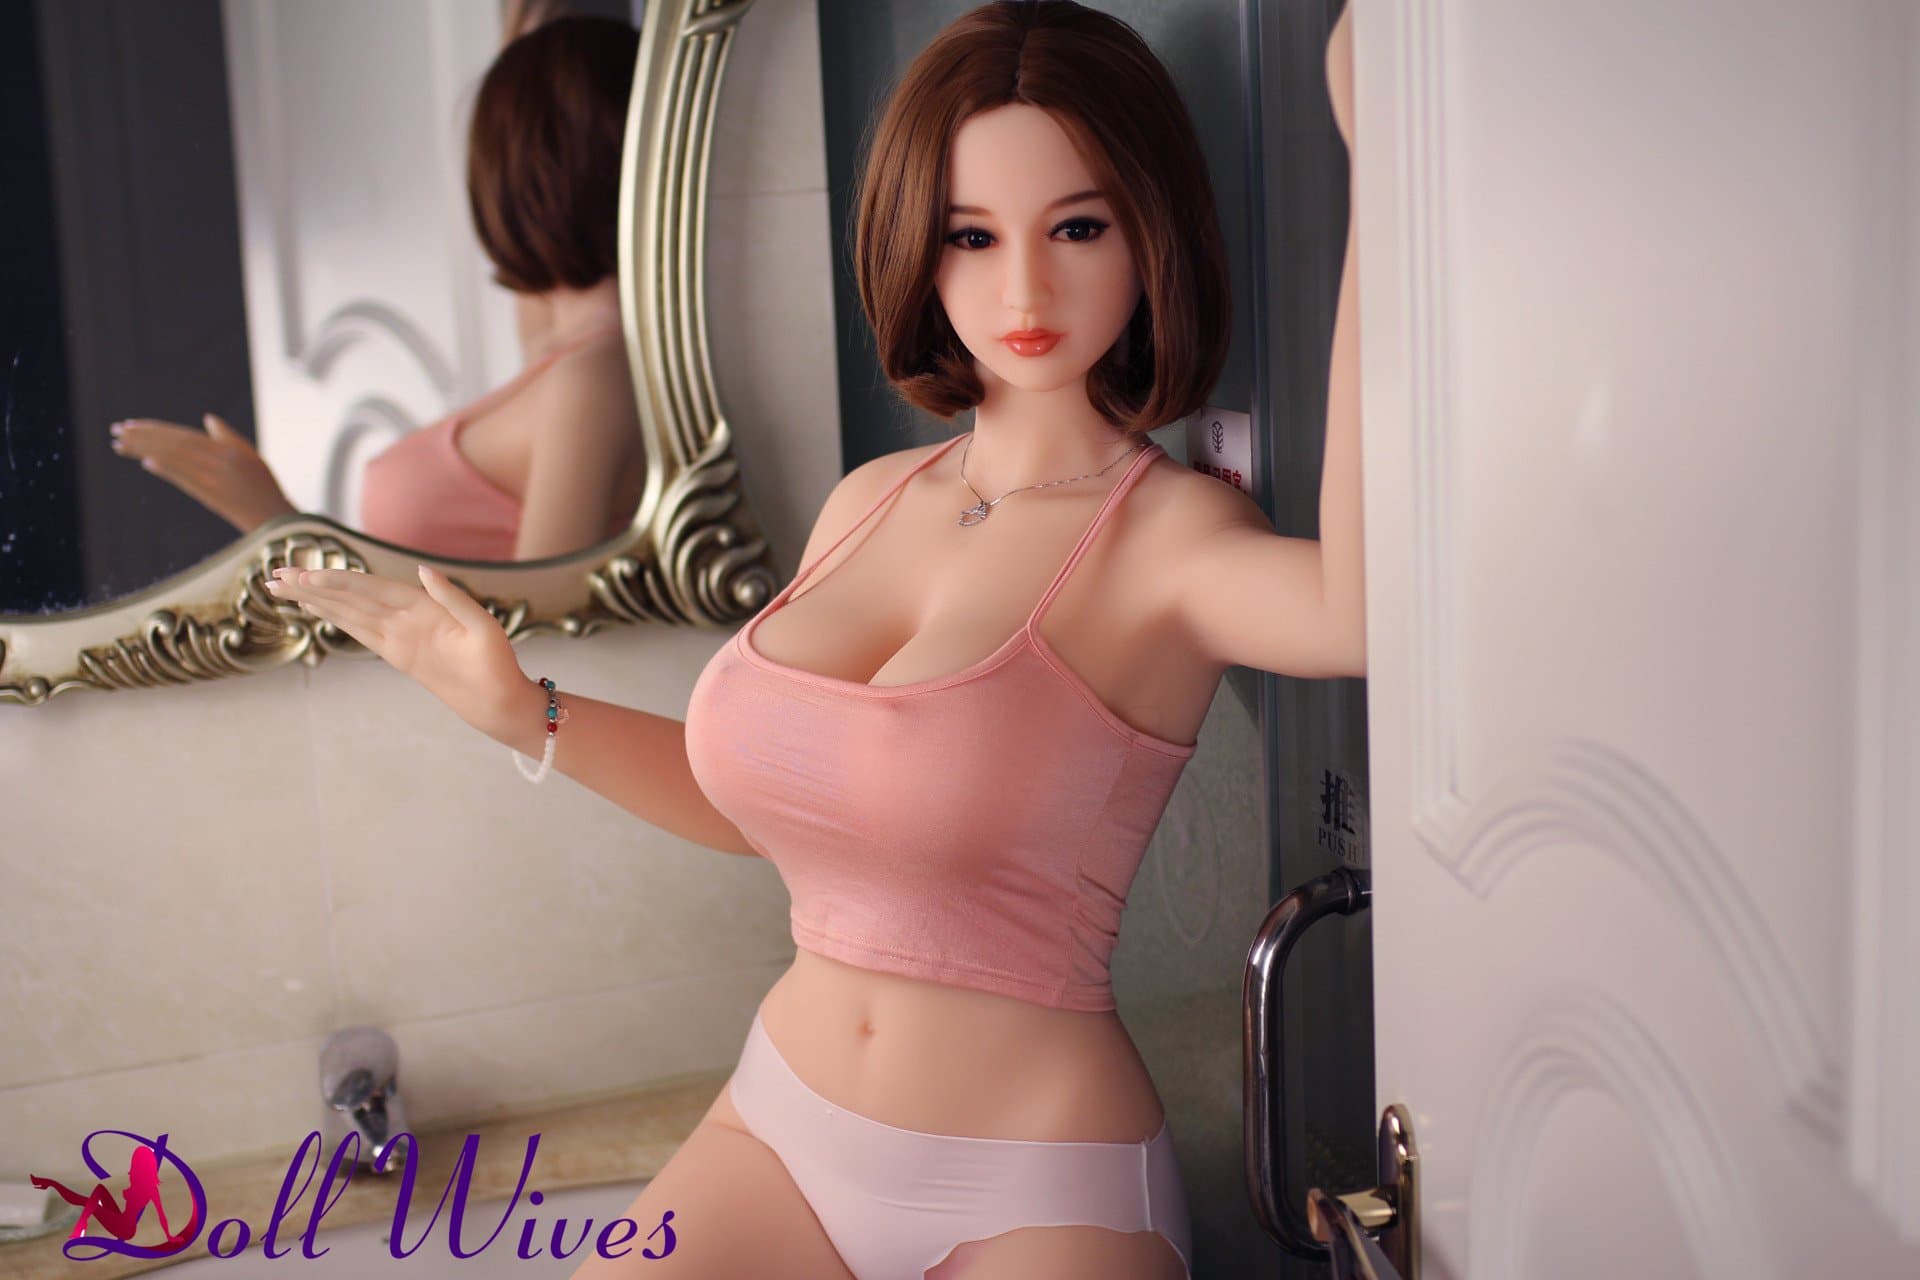 4 Reasons You Will Never Be Able To Silicone Love Dolls For Sale Like Steve Jobs